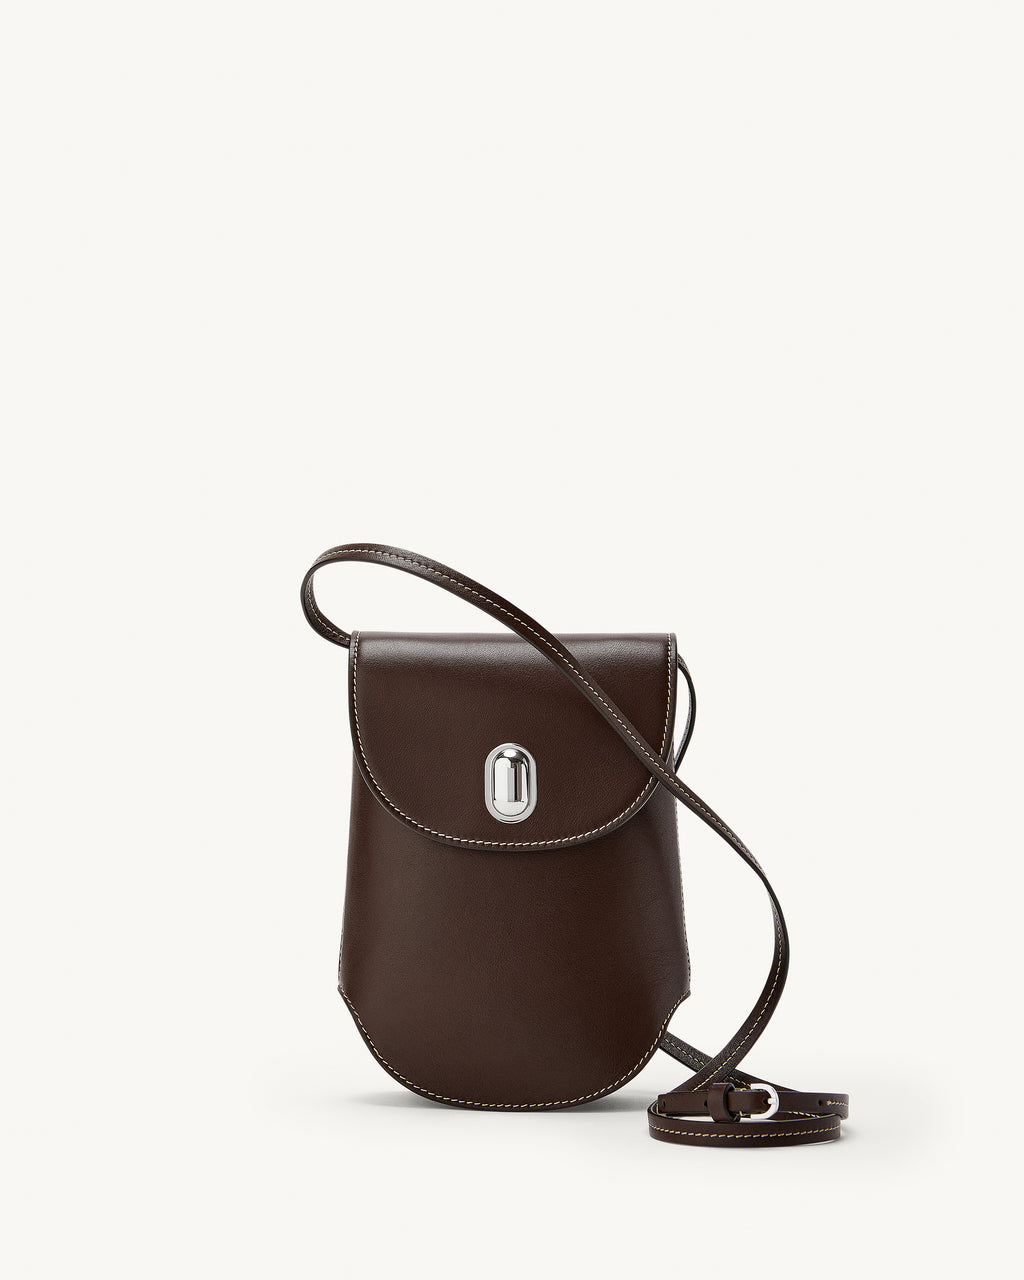 Tondo Pouch in Coffee Leather